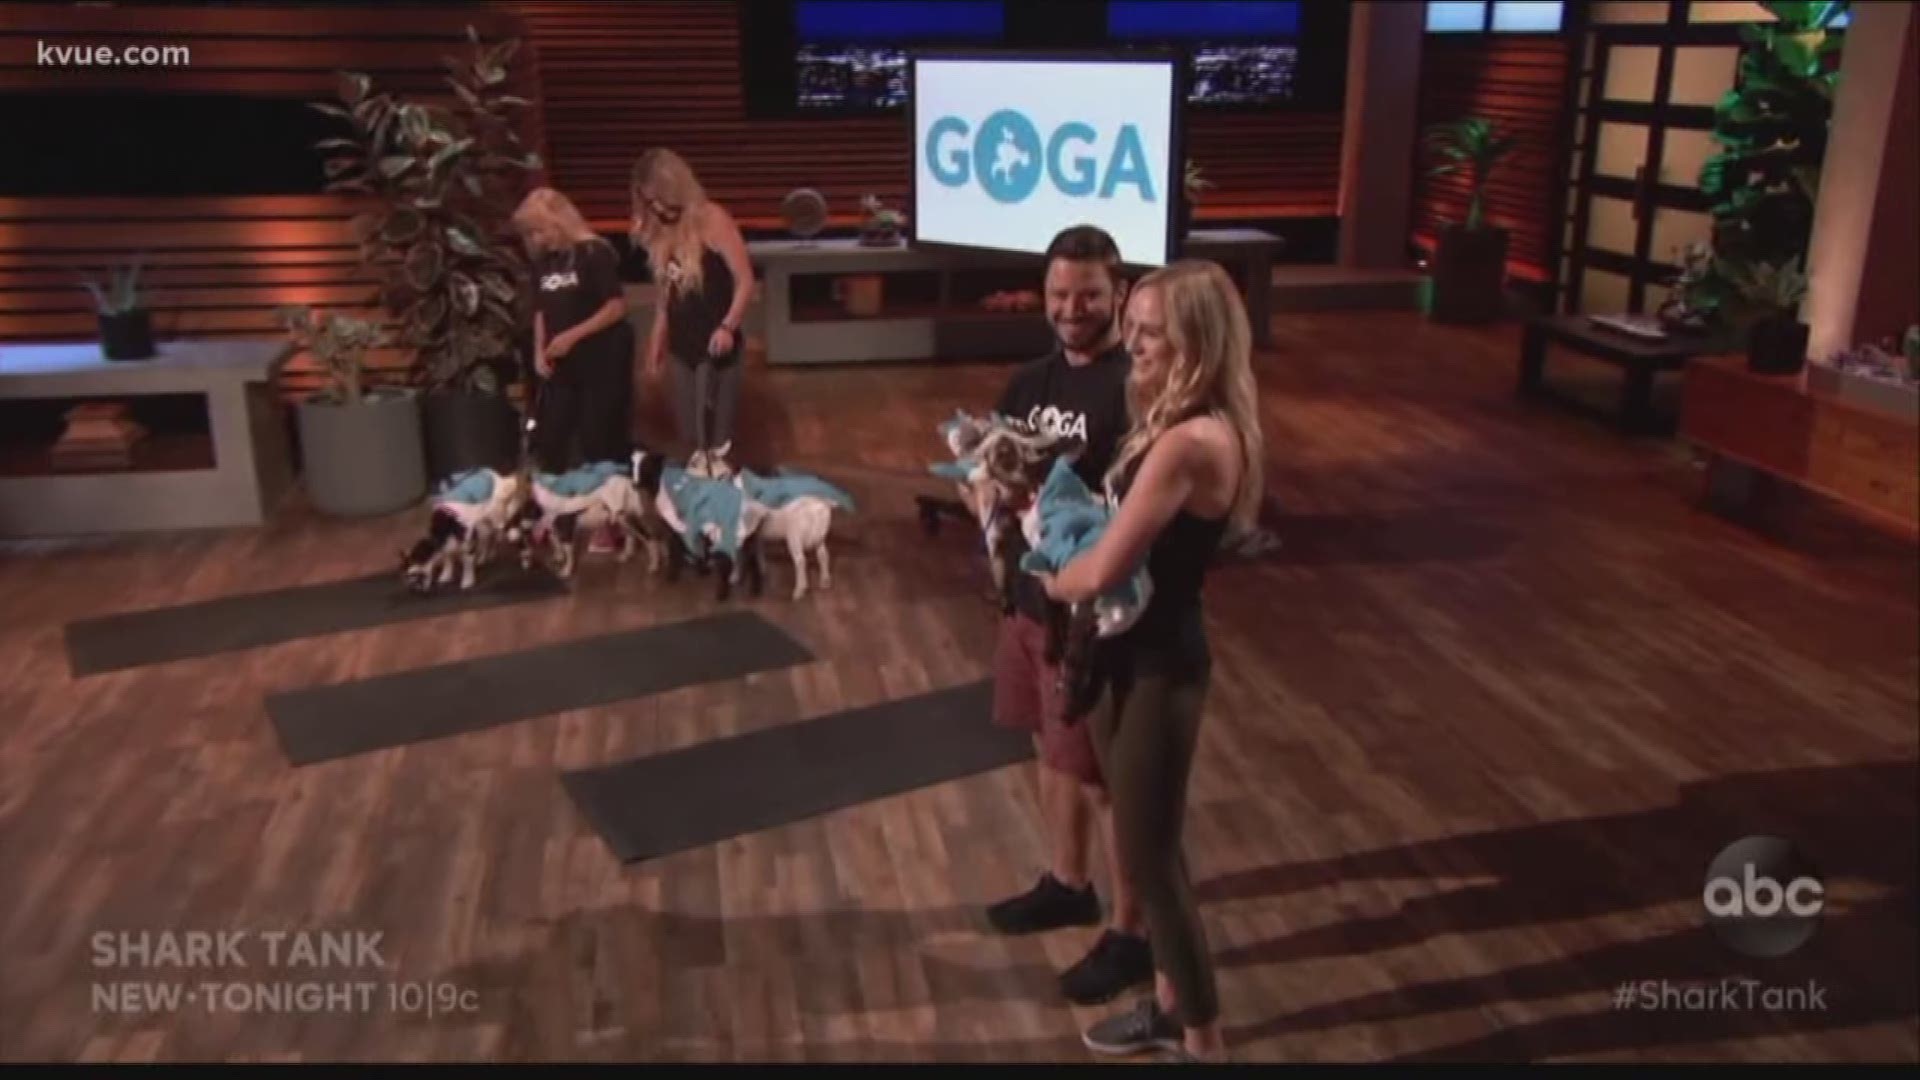 It was an exciting night for Austin yoga studio "Yoga & Goga," which was featured on an episode of ABC's "Shark Tank."